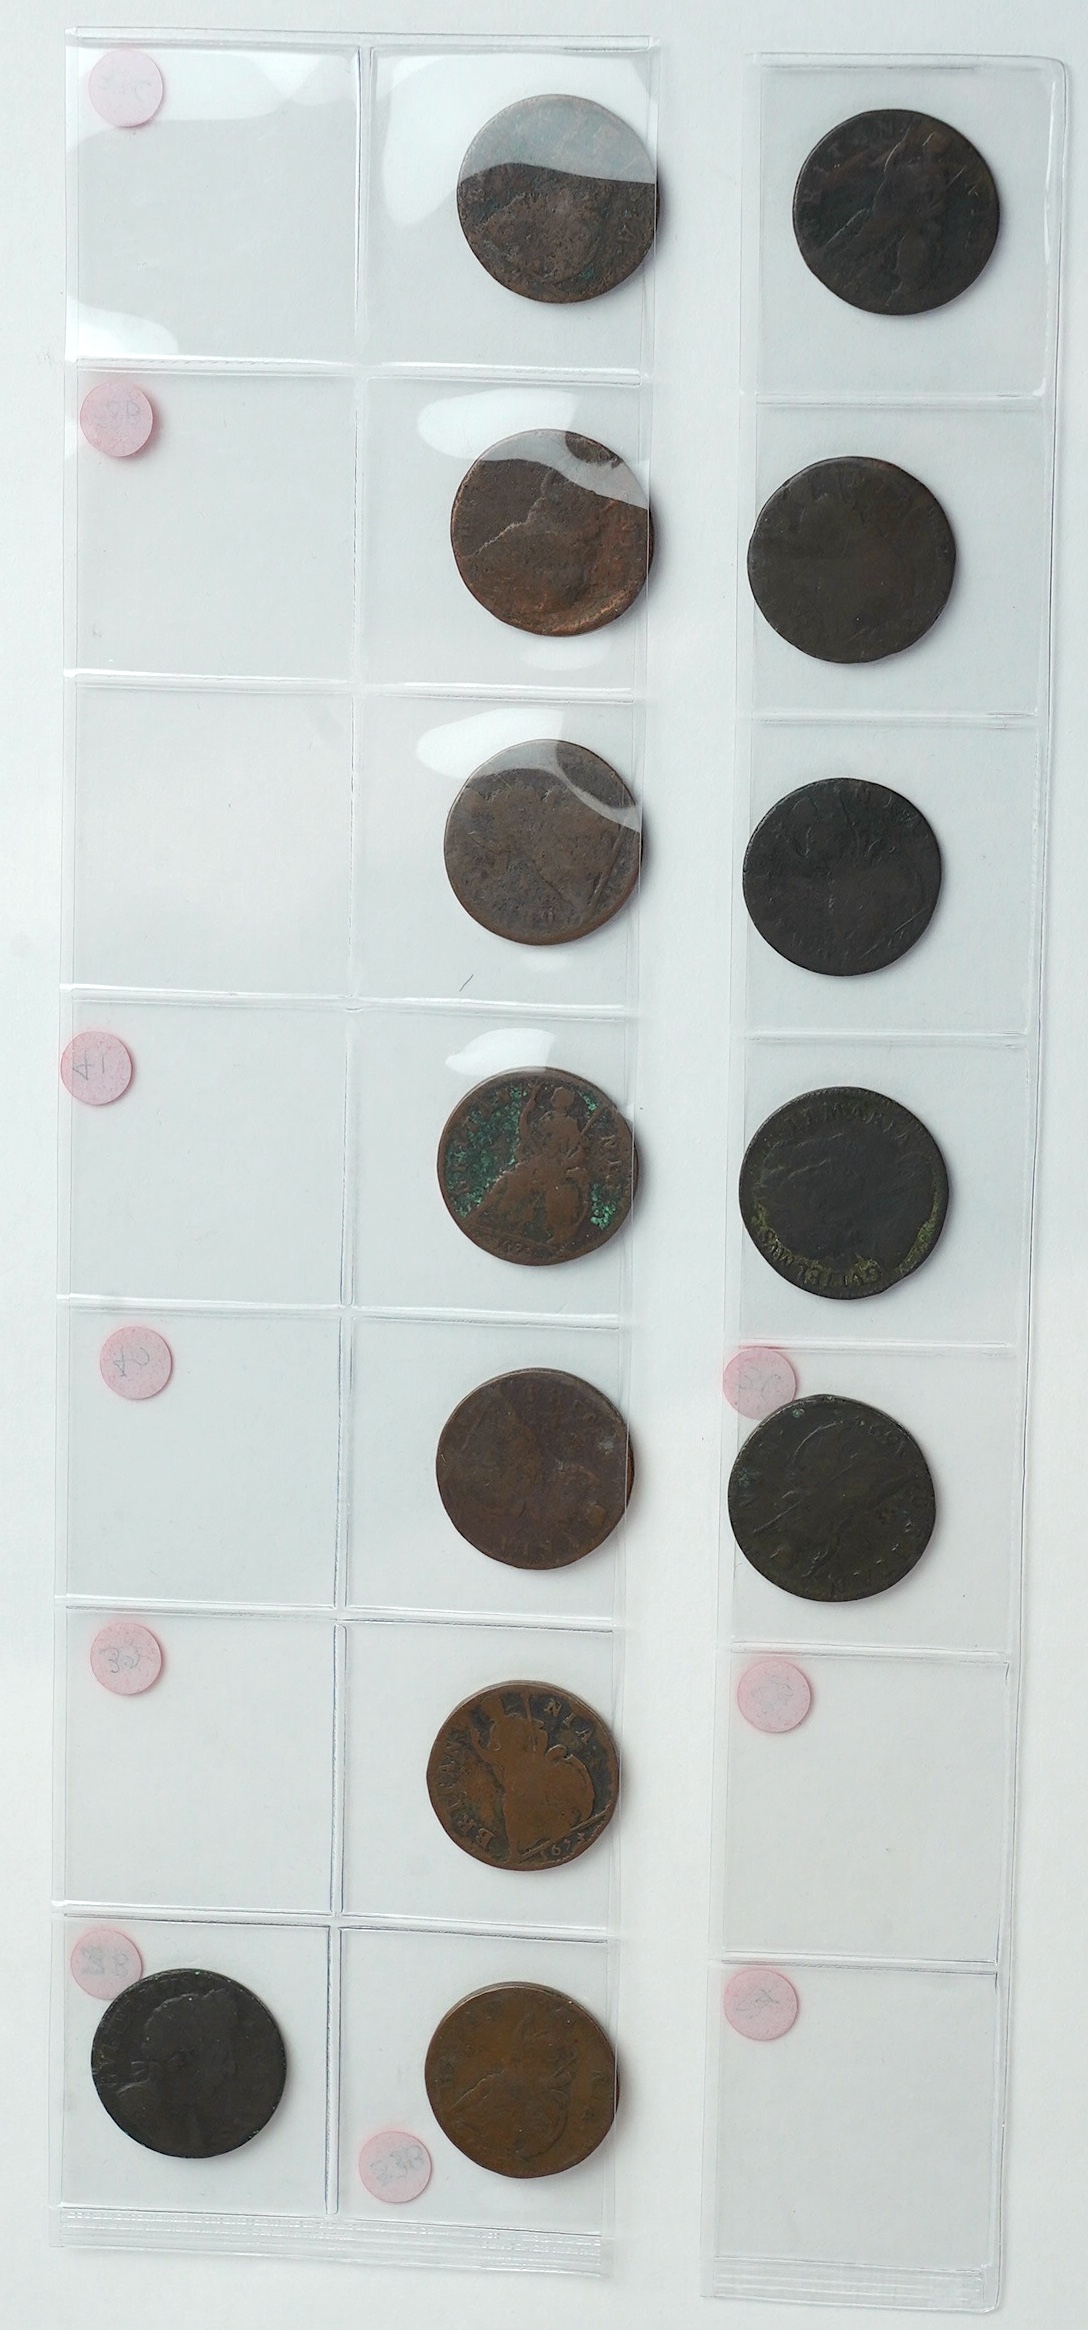 British copper farthings, Stuart period, Charles II to William III (1660-1702); seven Charles II farthings, including 1672, fine, otherwise fair to good, five William & Mary farthings, including 1694, fine, otherwise fai